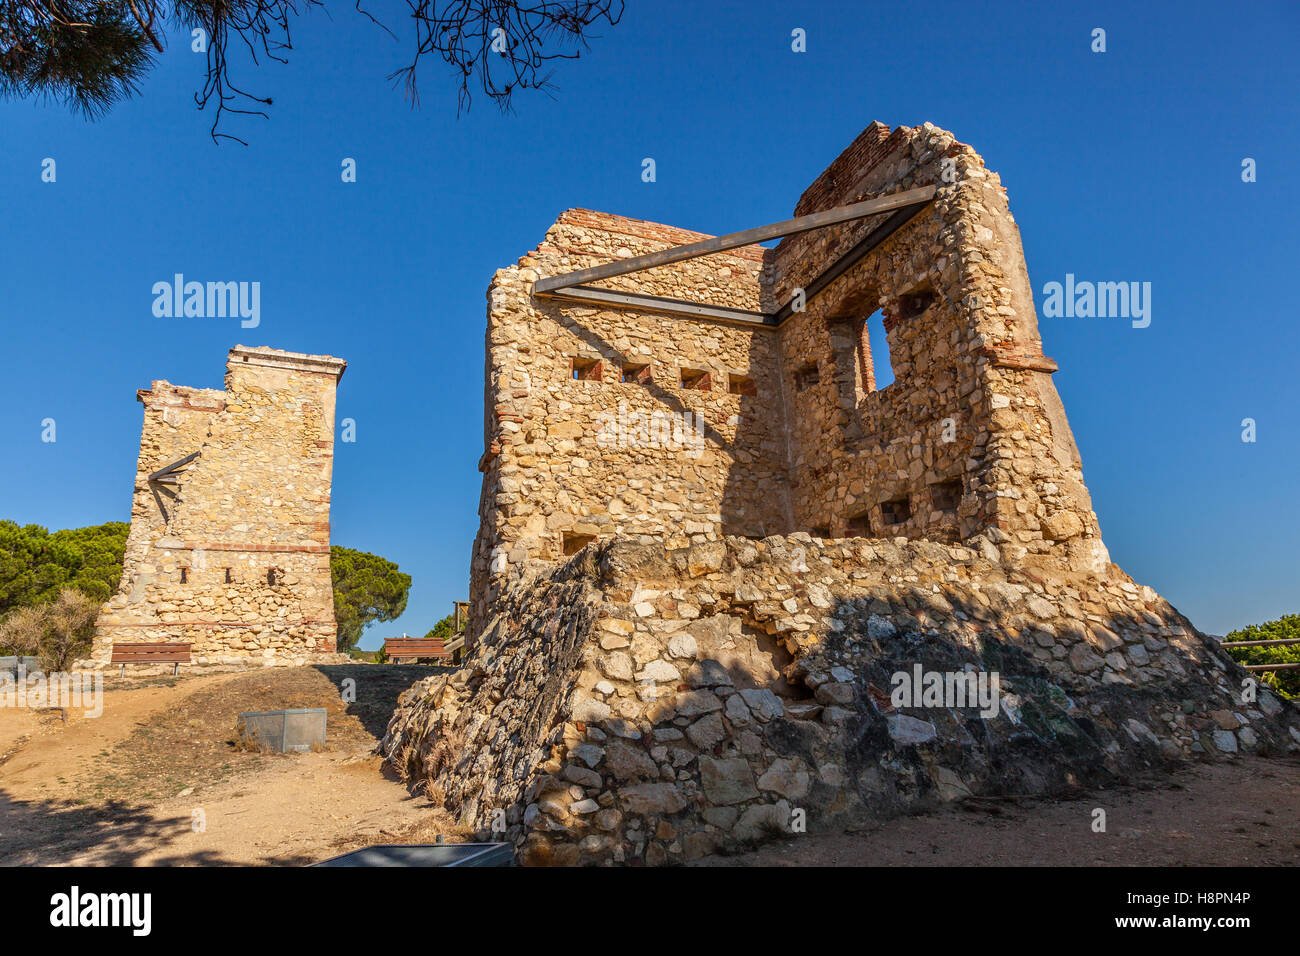 Ruins of old optical telegraph towers named Les Torretes near Calella - the semaphore towers were built in the mid-19th century. Stock Photo